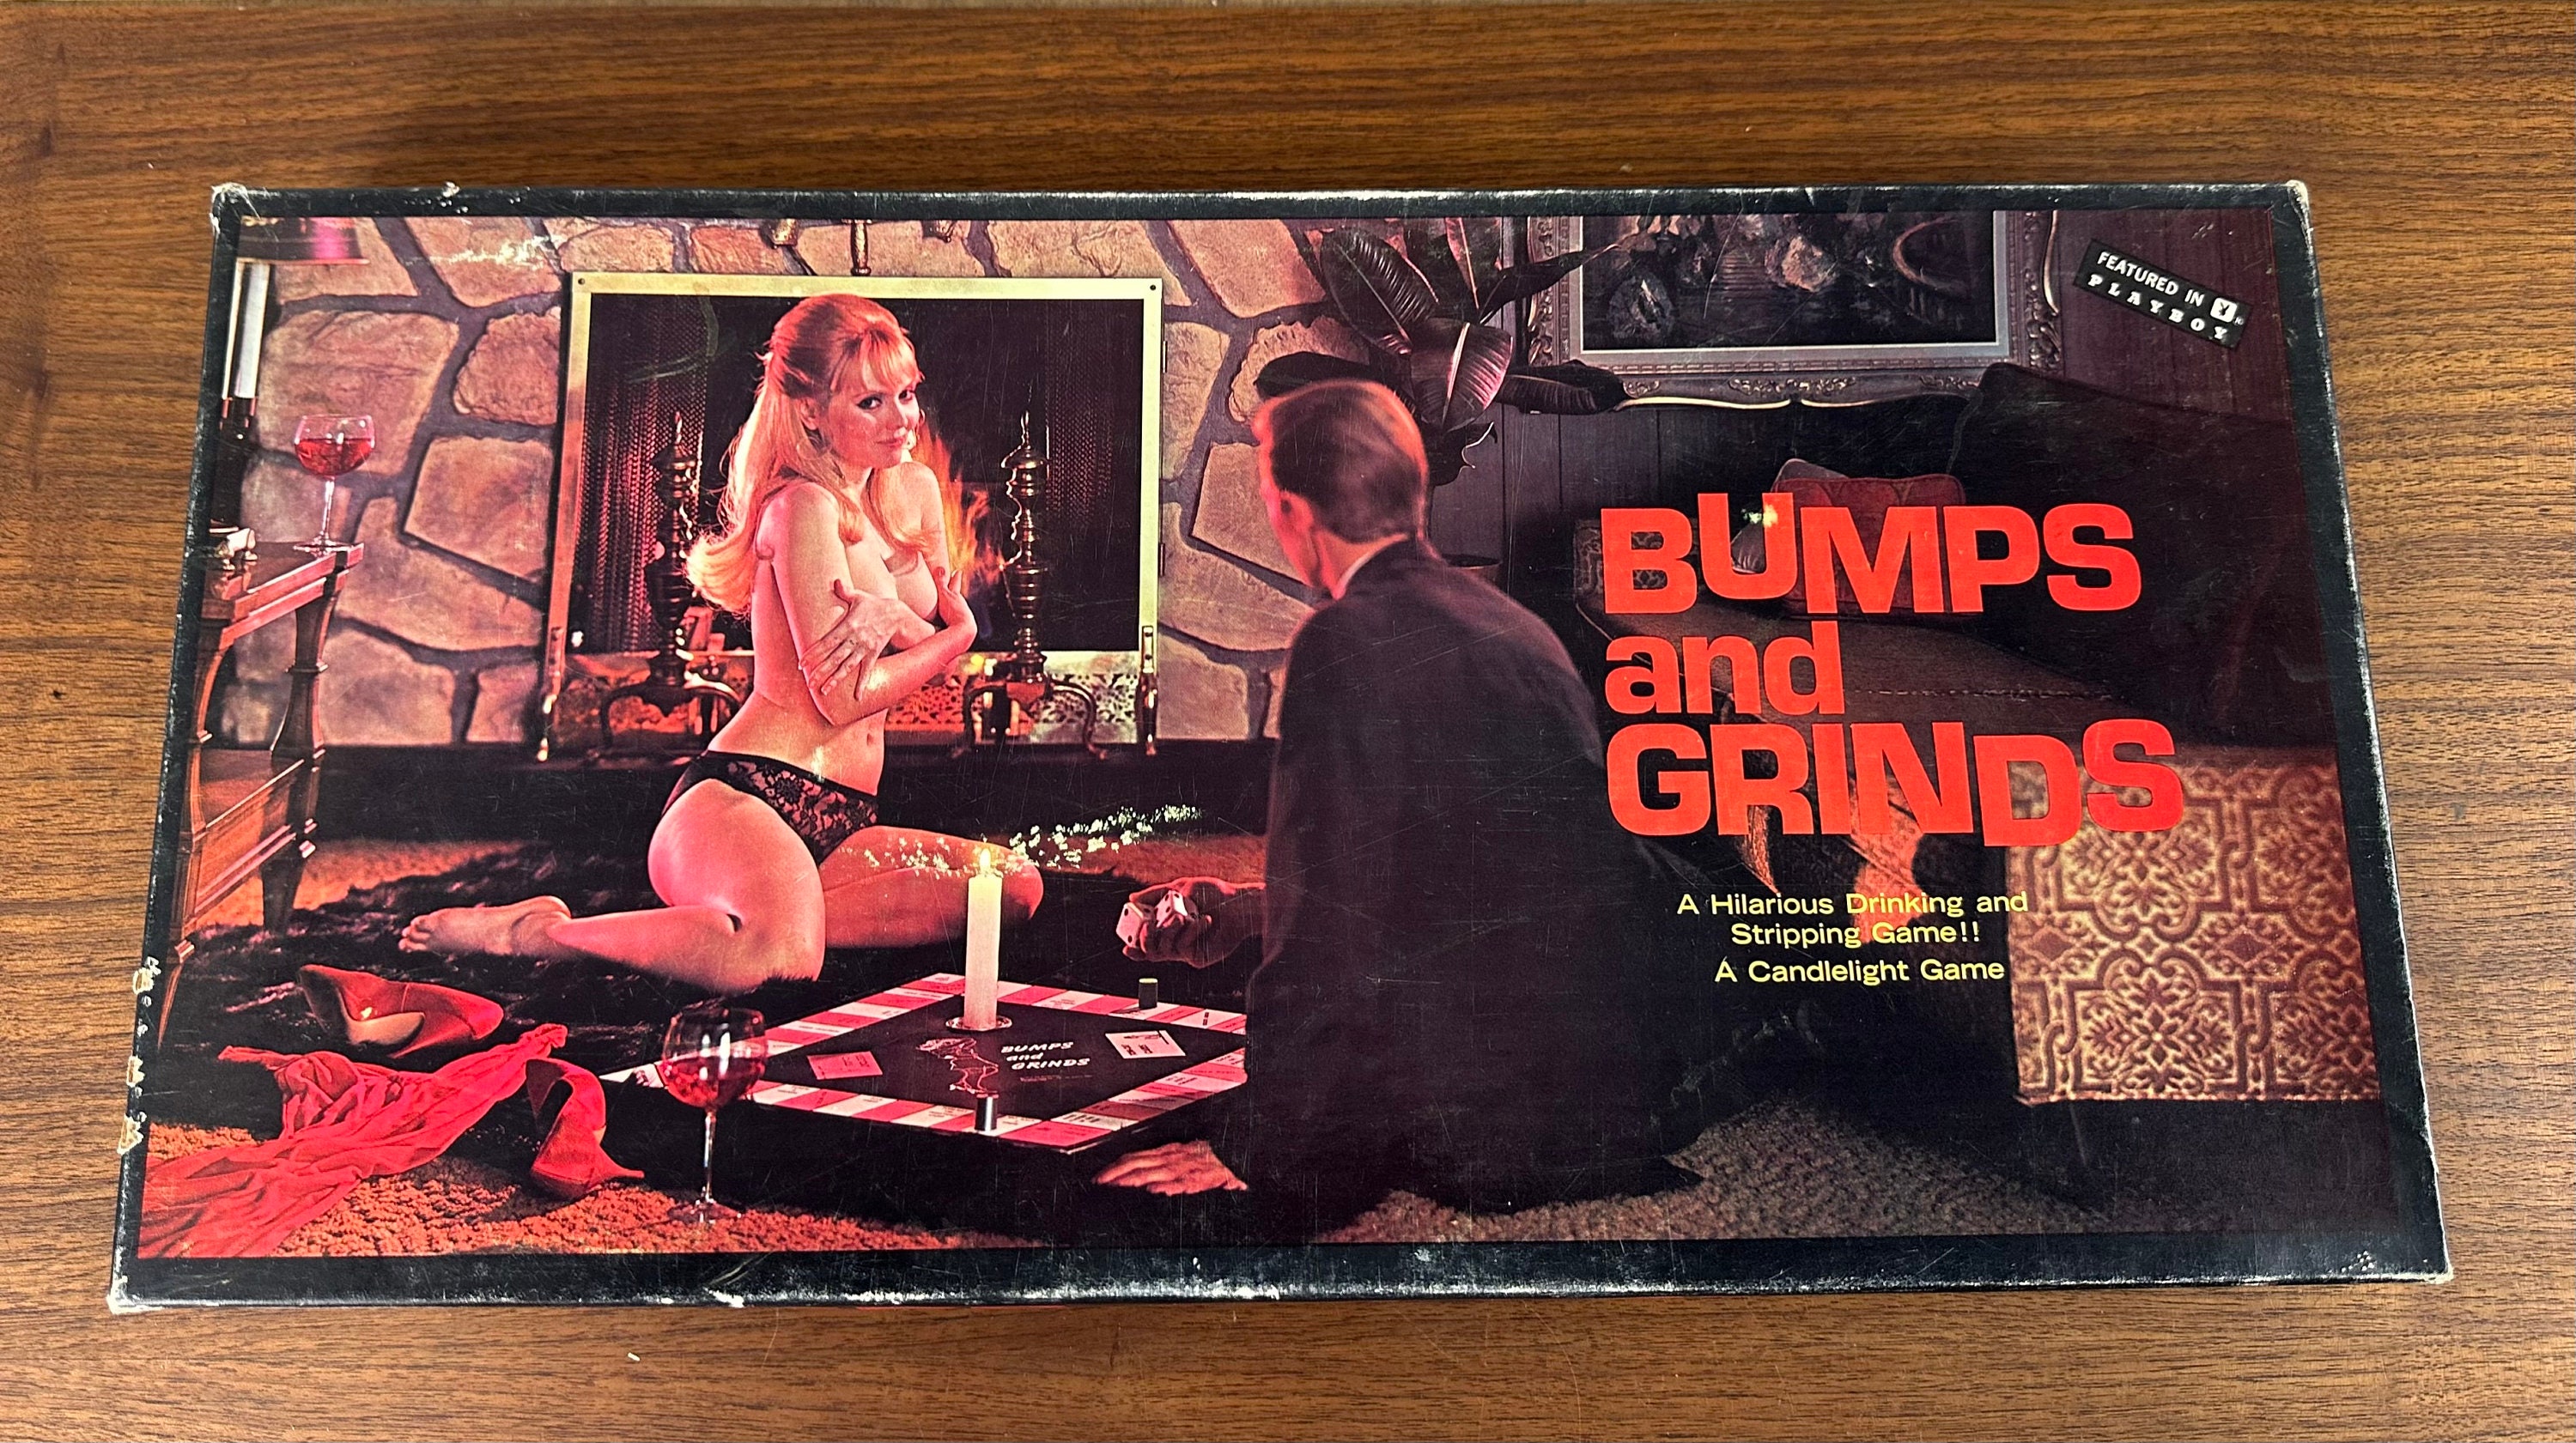 Vintage 1970 Adult-themed Bump and Grinds Board Game picture